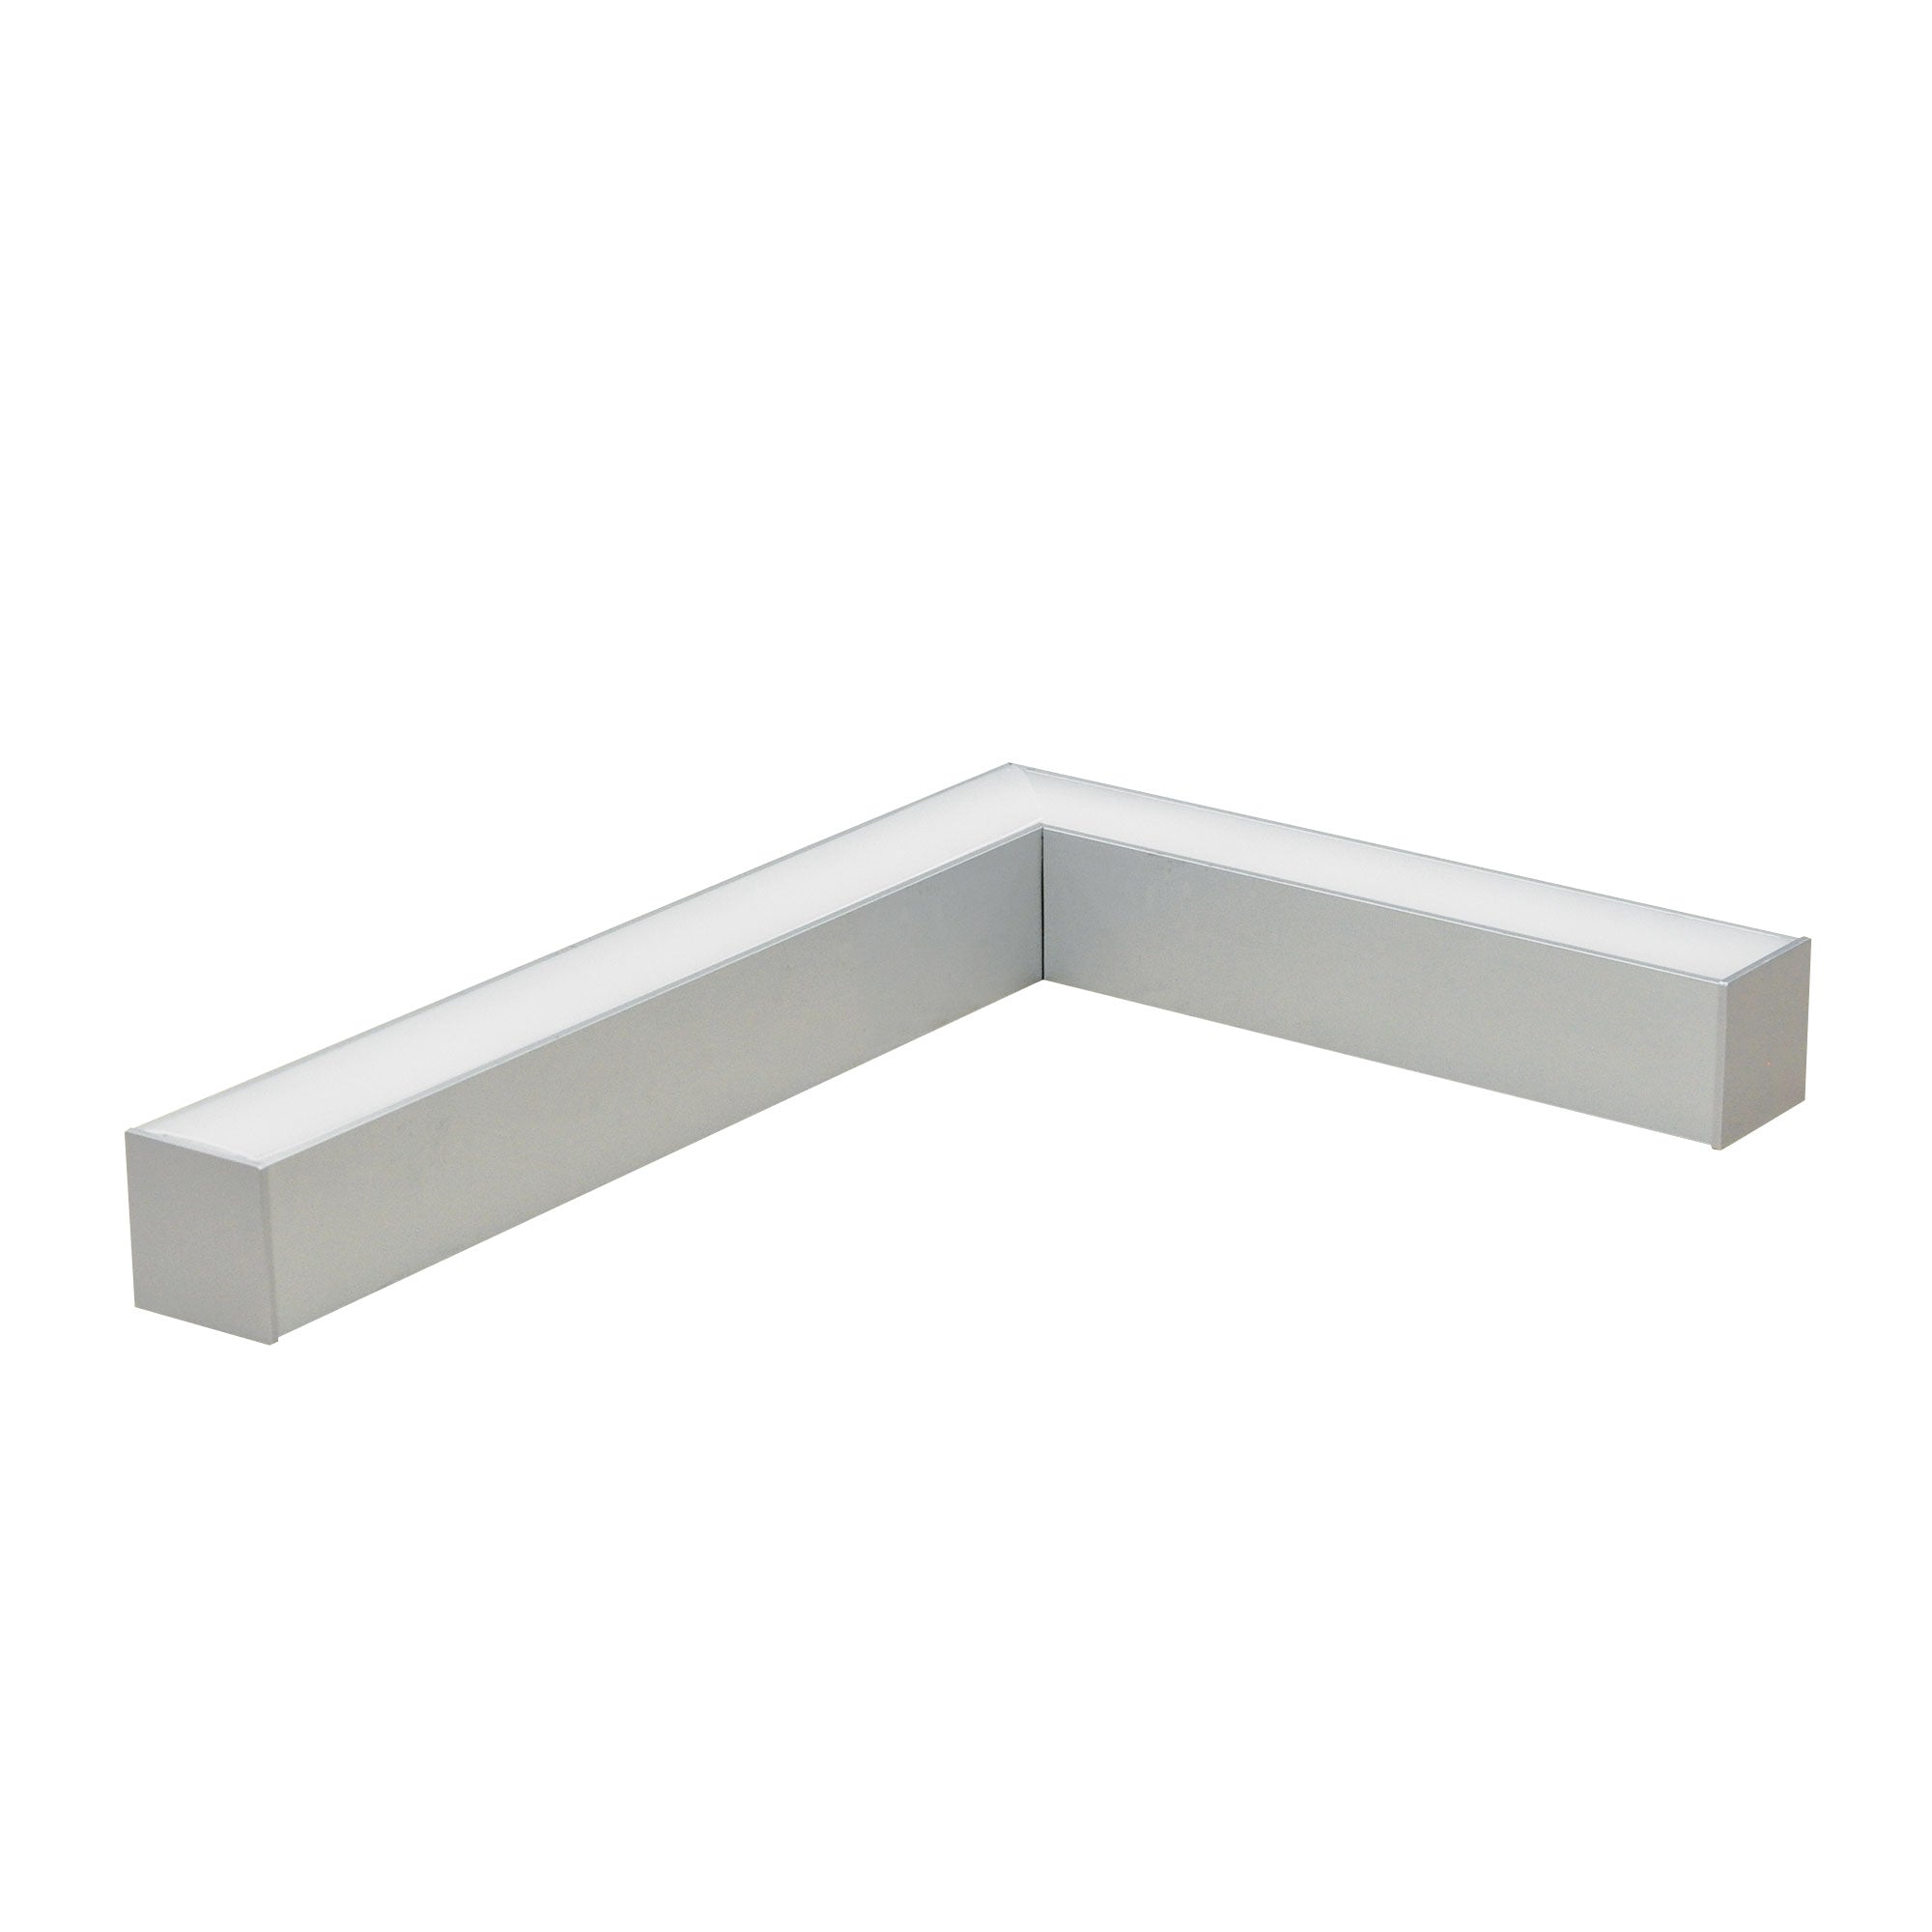 Nora Lighting NLIN-L1040A - Linear -  InchL Inch Shaped L-Line LED Direct Linear w/ Dedicated CCT, 3000lm / 4000K, Aluminum Finish